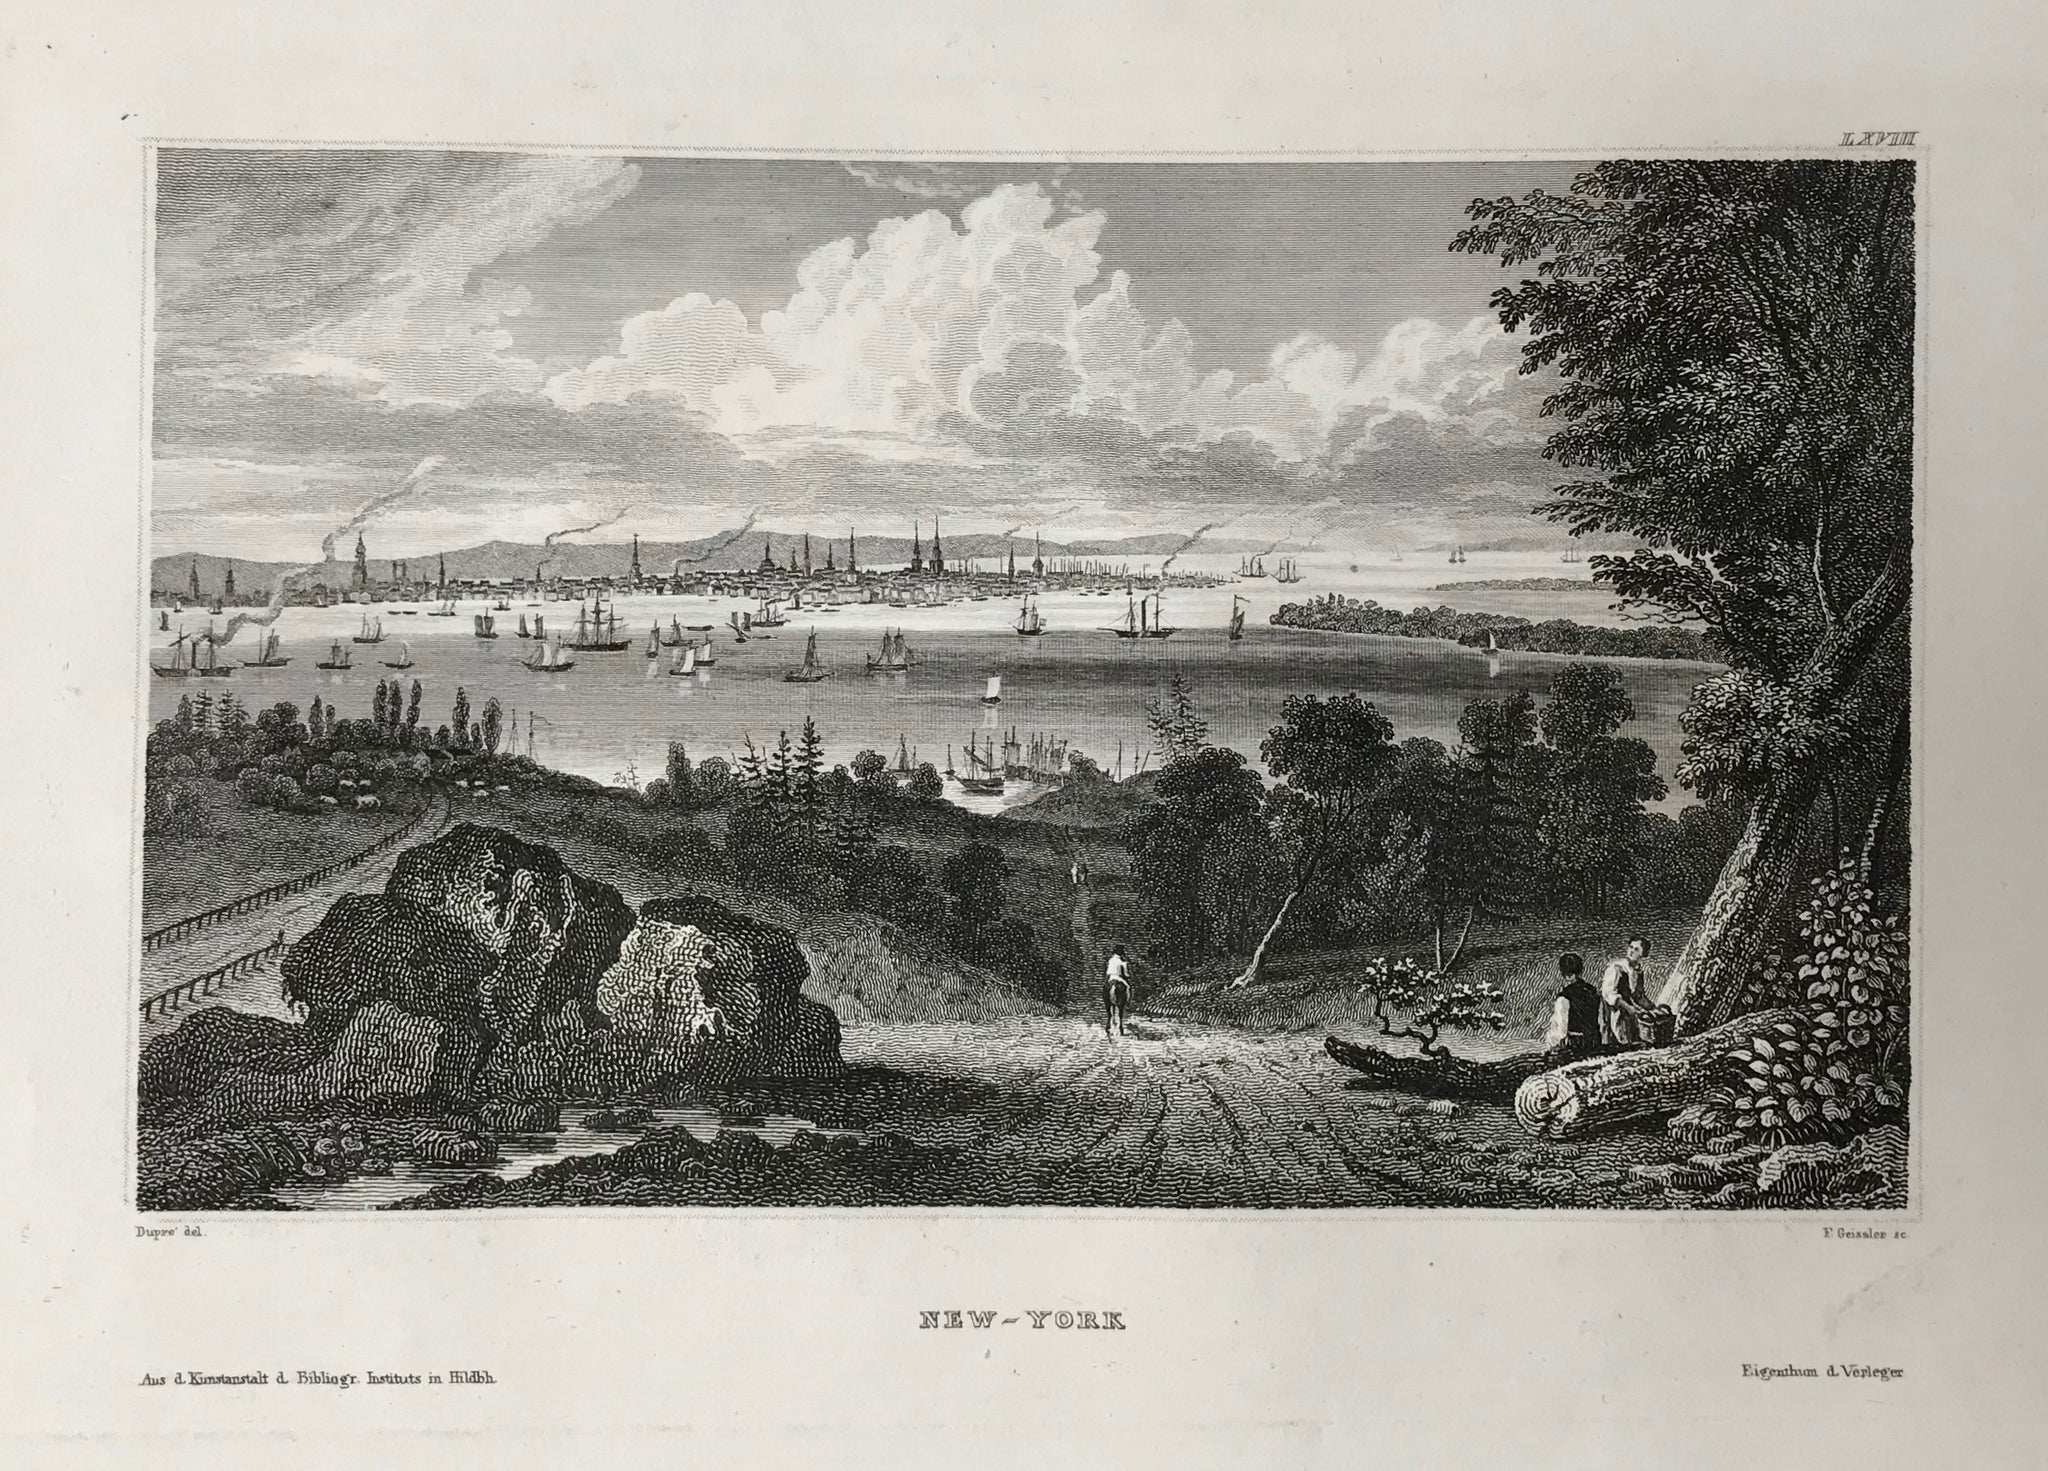 "New - York"  Steel engraving by F. Geisler after Dupre ca 1845.